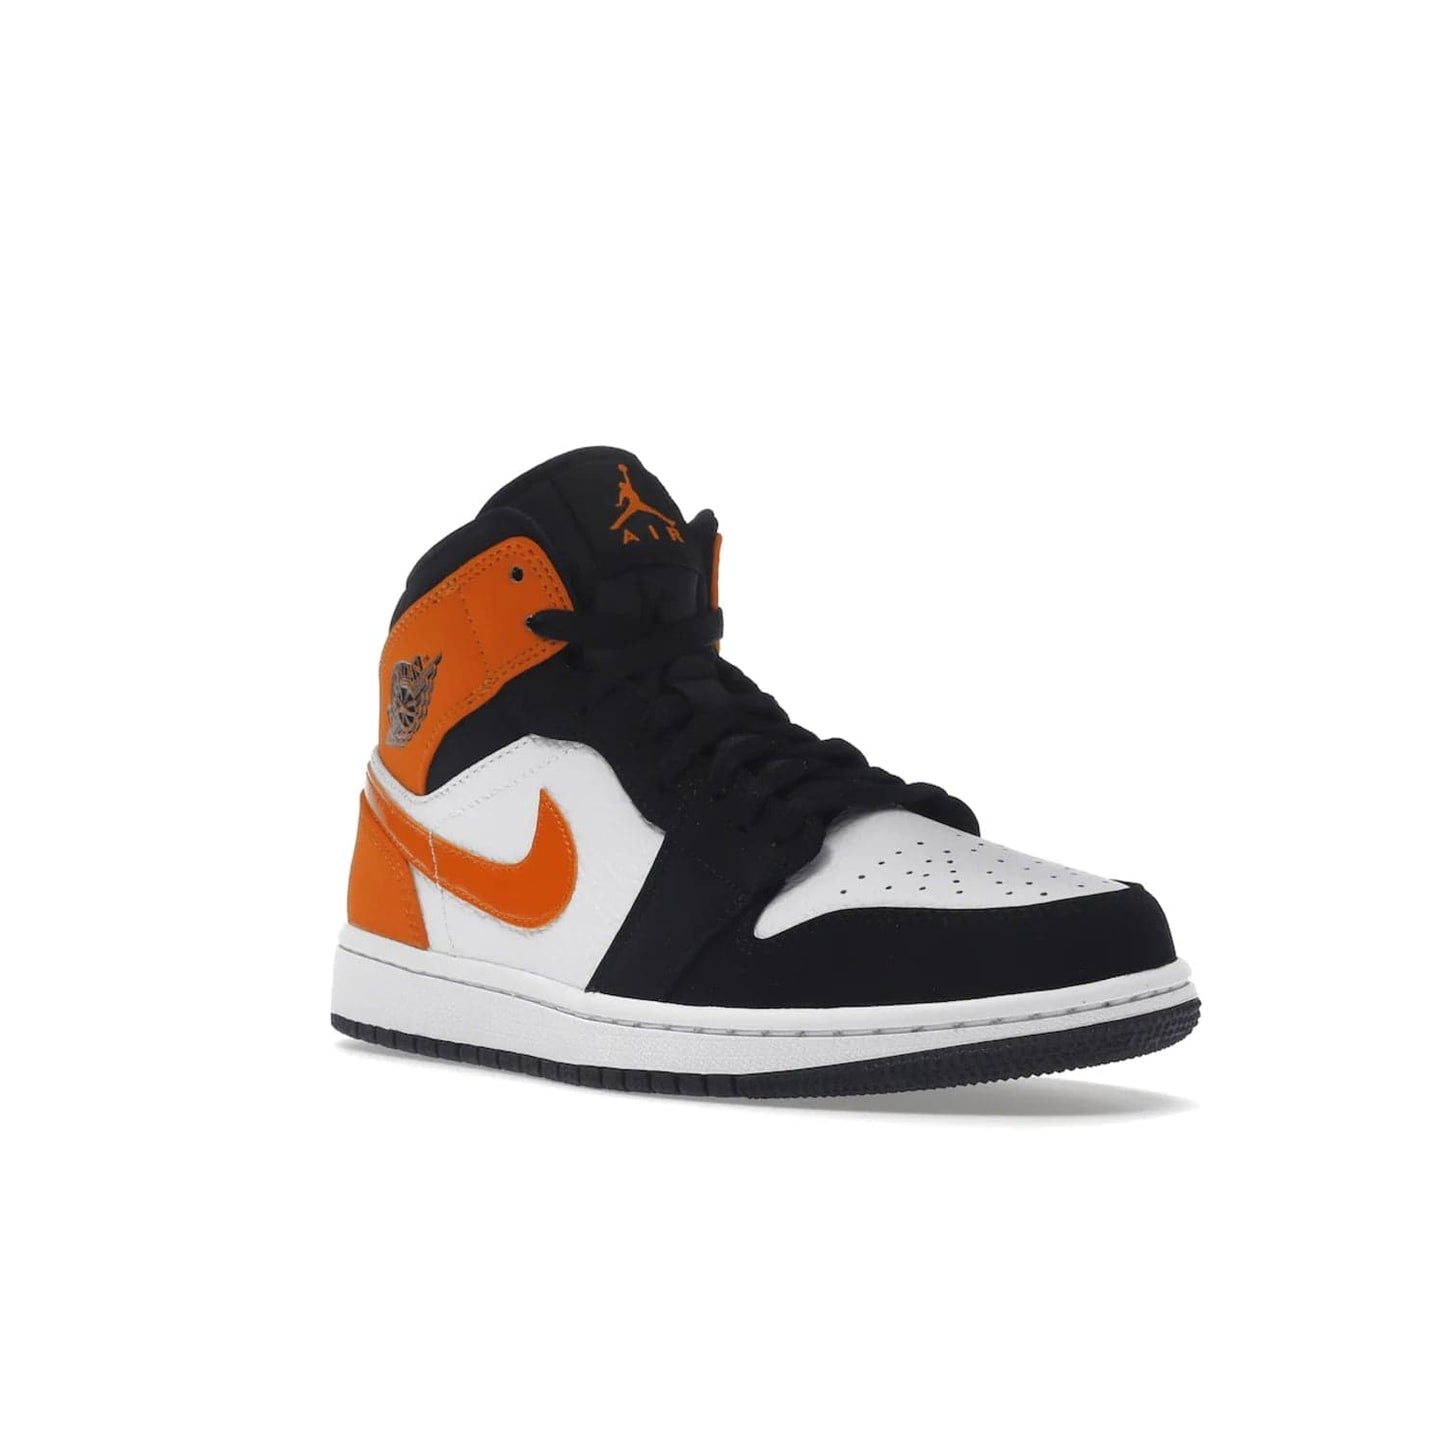 Jordan 1 Mid Shattered Backboard - Image 6 - Only at www.BallersClubKickz.com - The Air Jordan 1 Mid Shattered Backboard offers a timeless Black/White-Starfish colorway. Classic Swoosh logo and AJ insignia plus a shatterd backboard graphic on the insole. Get your pair today!